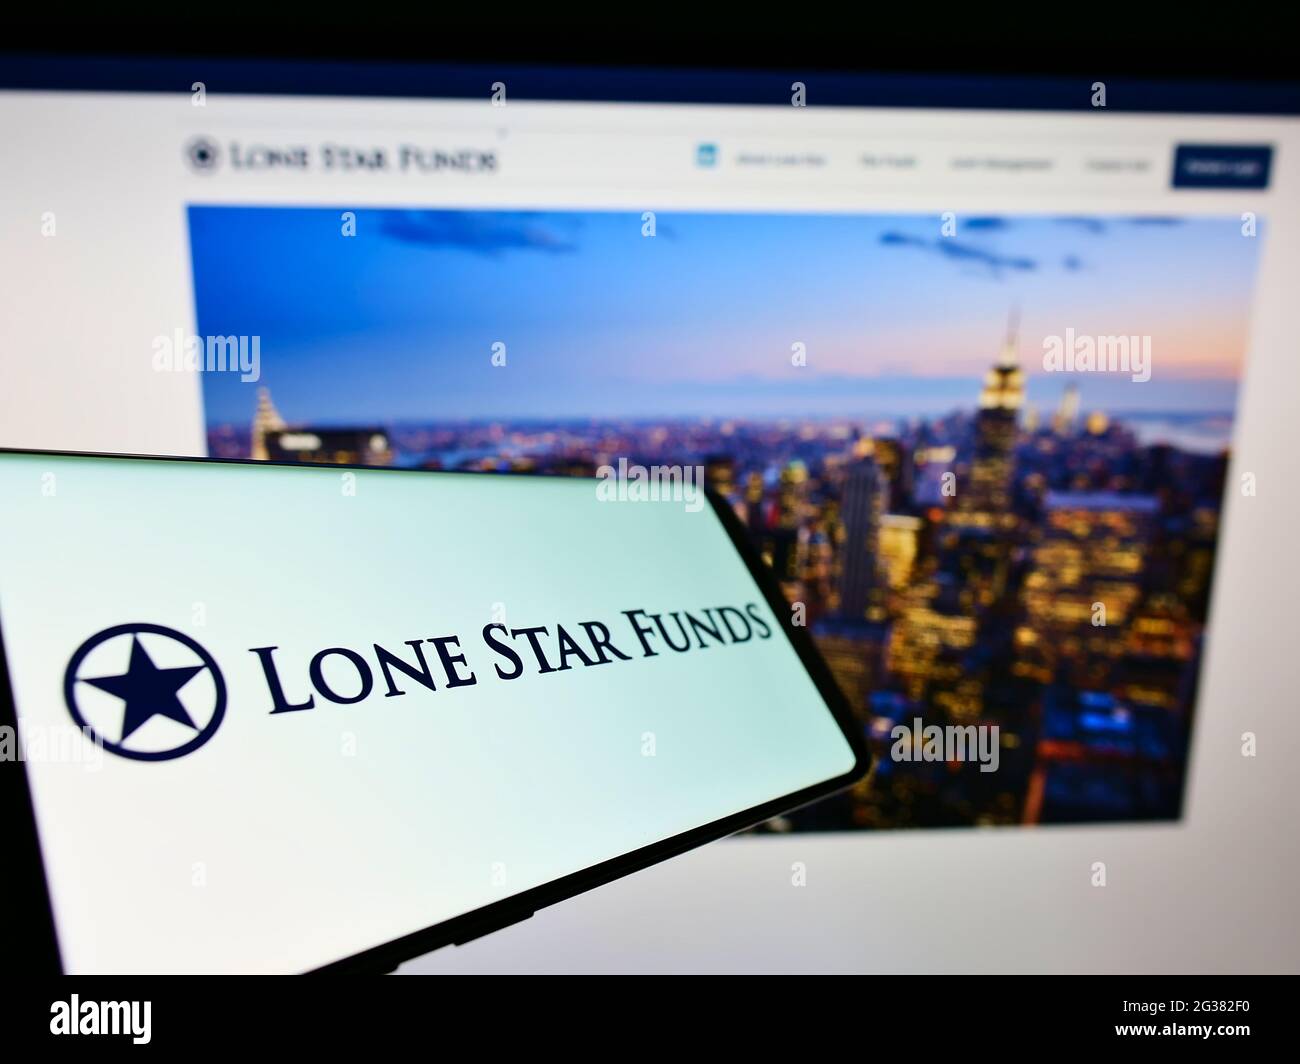 Cellphone with logo of US investment company Lone Star Funds on screen in front of business website. Focus on center-right of phone display. Stock Photo